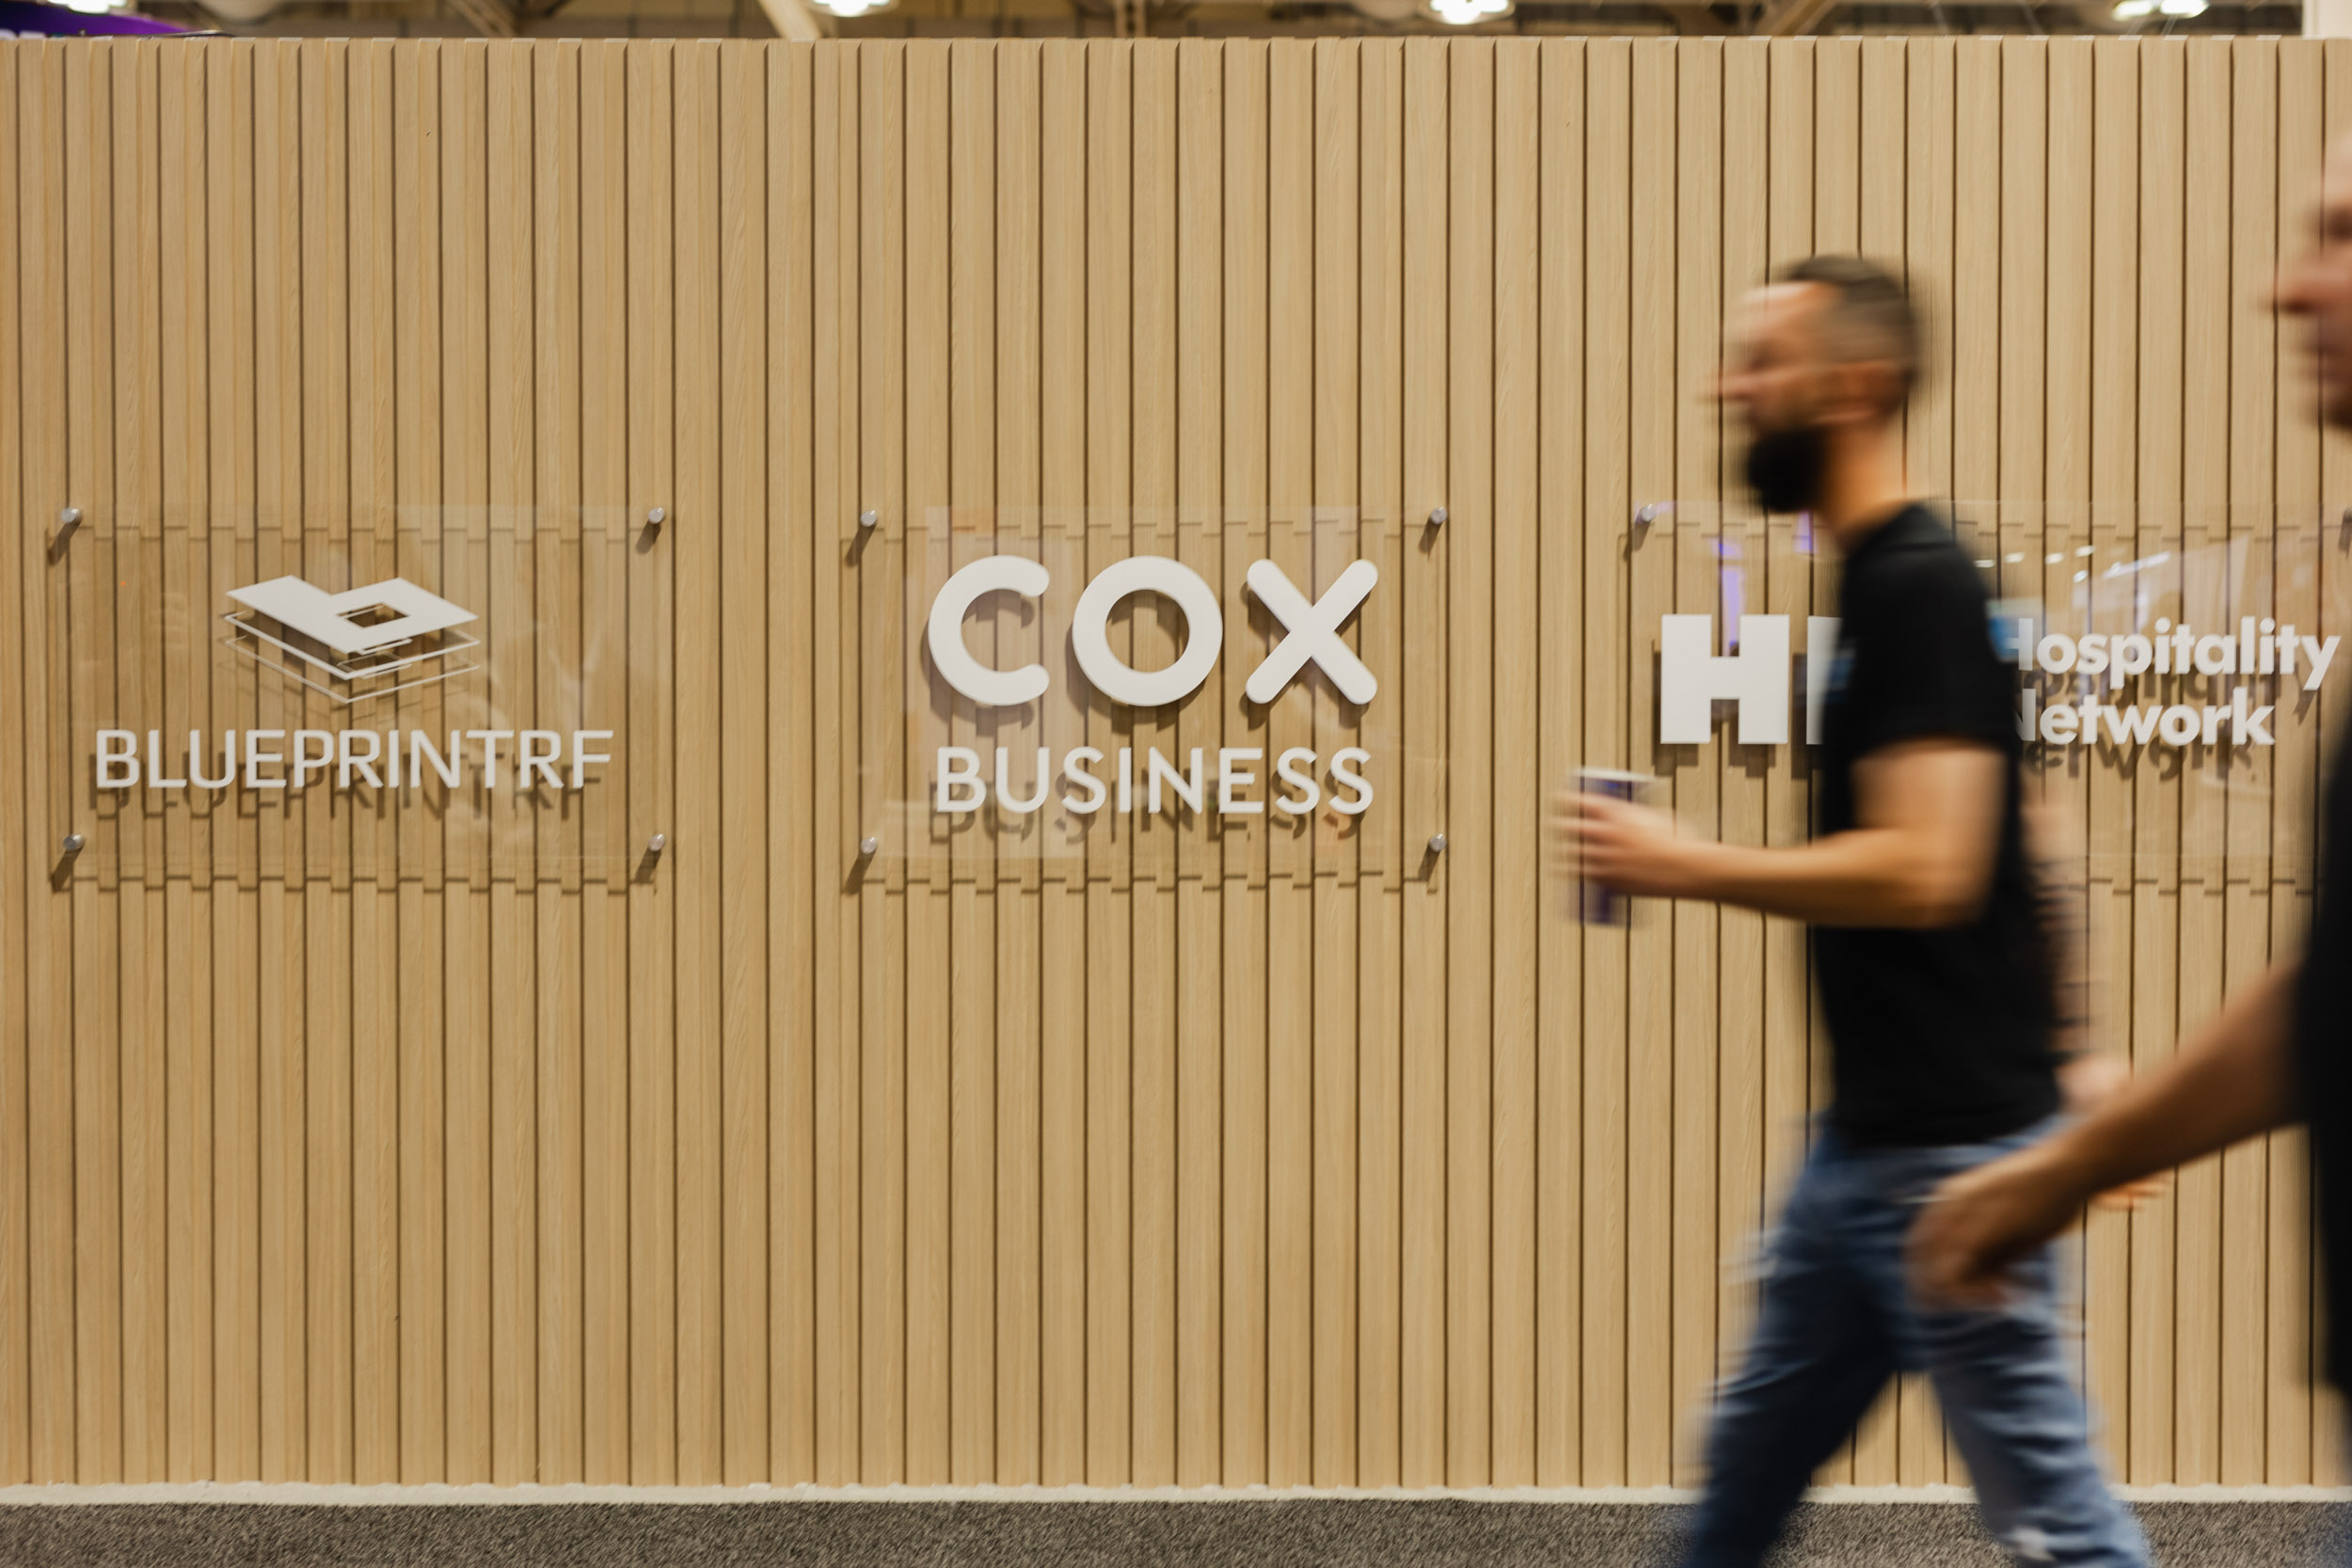 A man walks past a sign that says "Cox Blueprint Business" in Toronto.